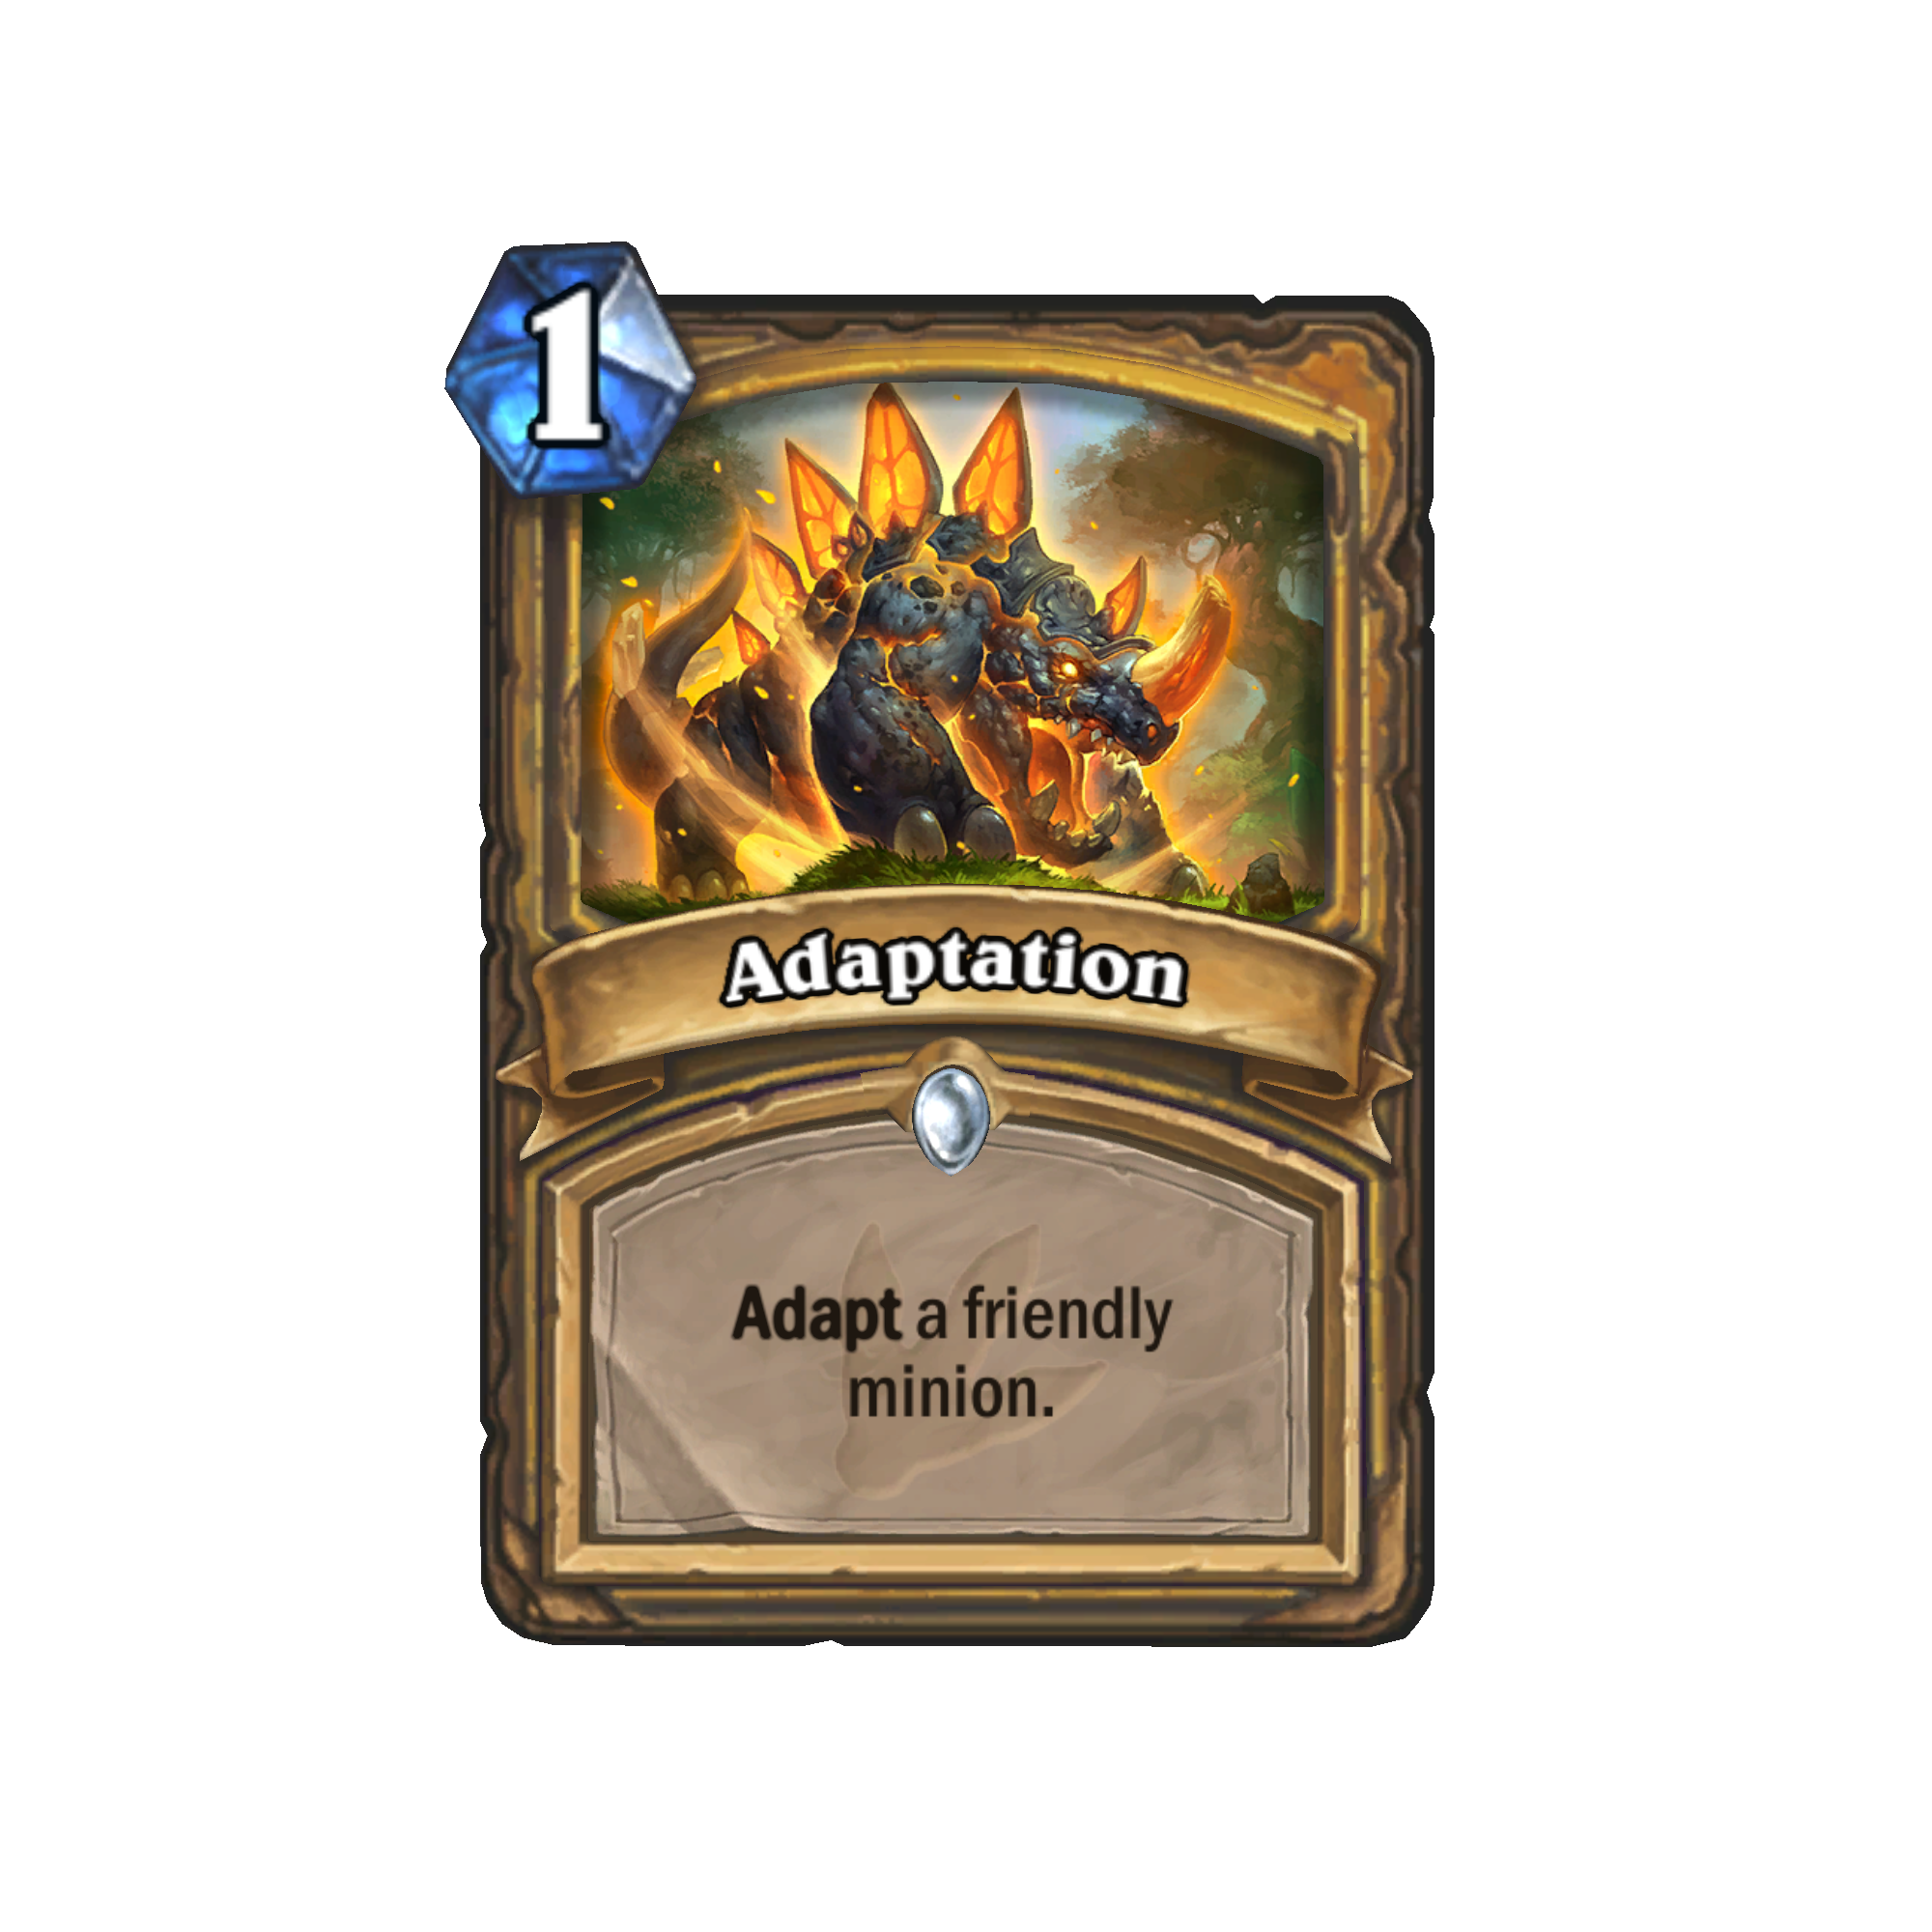 Download PNG image - Hearthstone PNG Image 